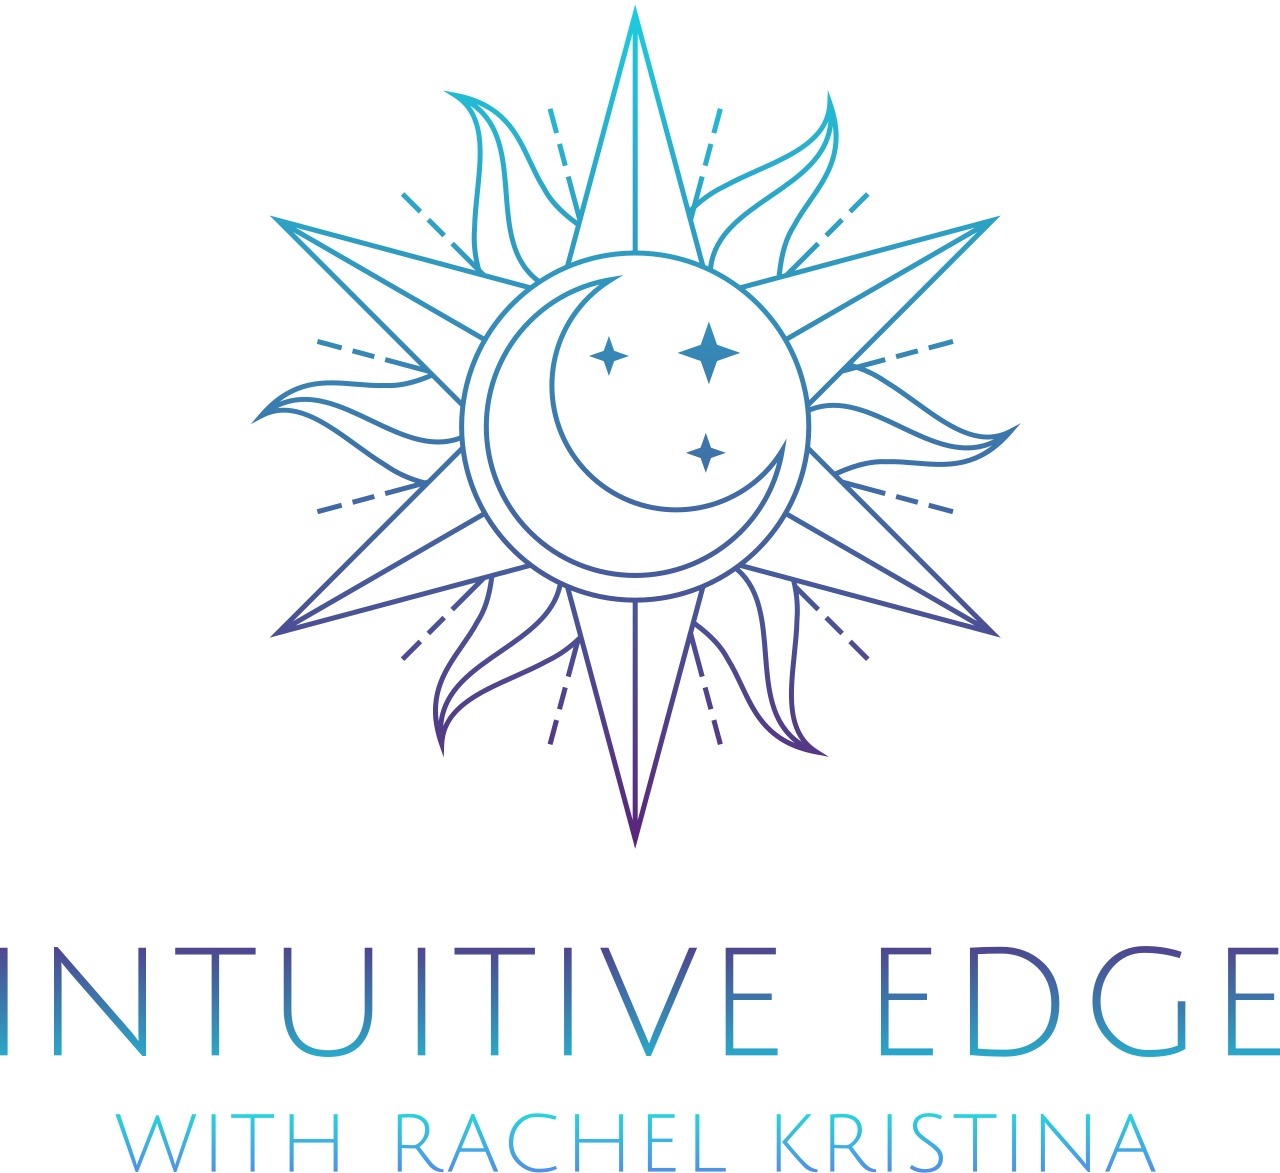 intuitive edge's web page